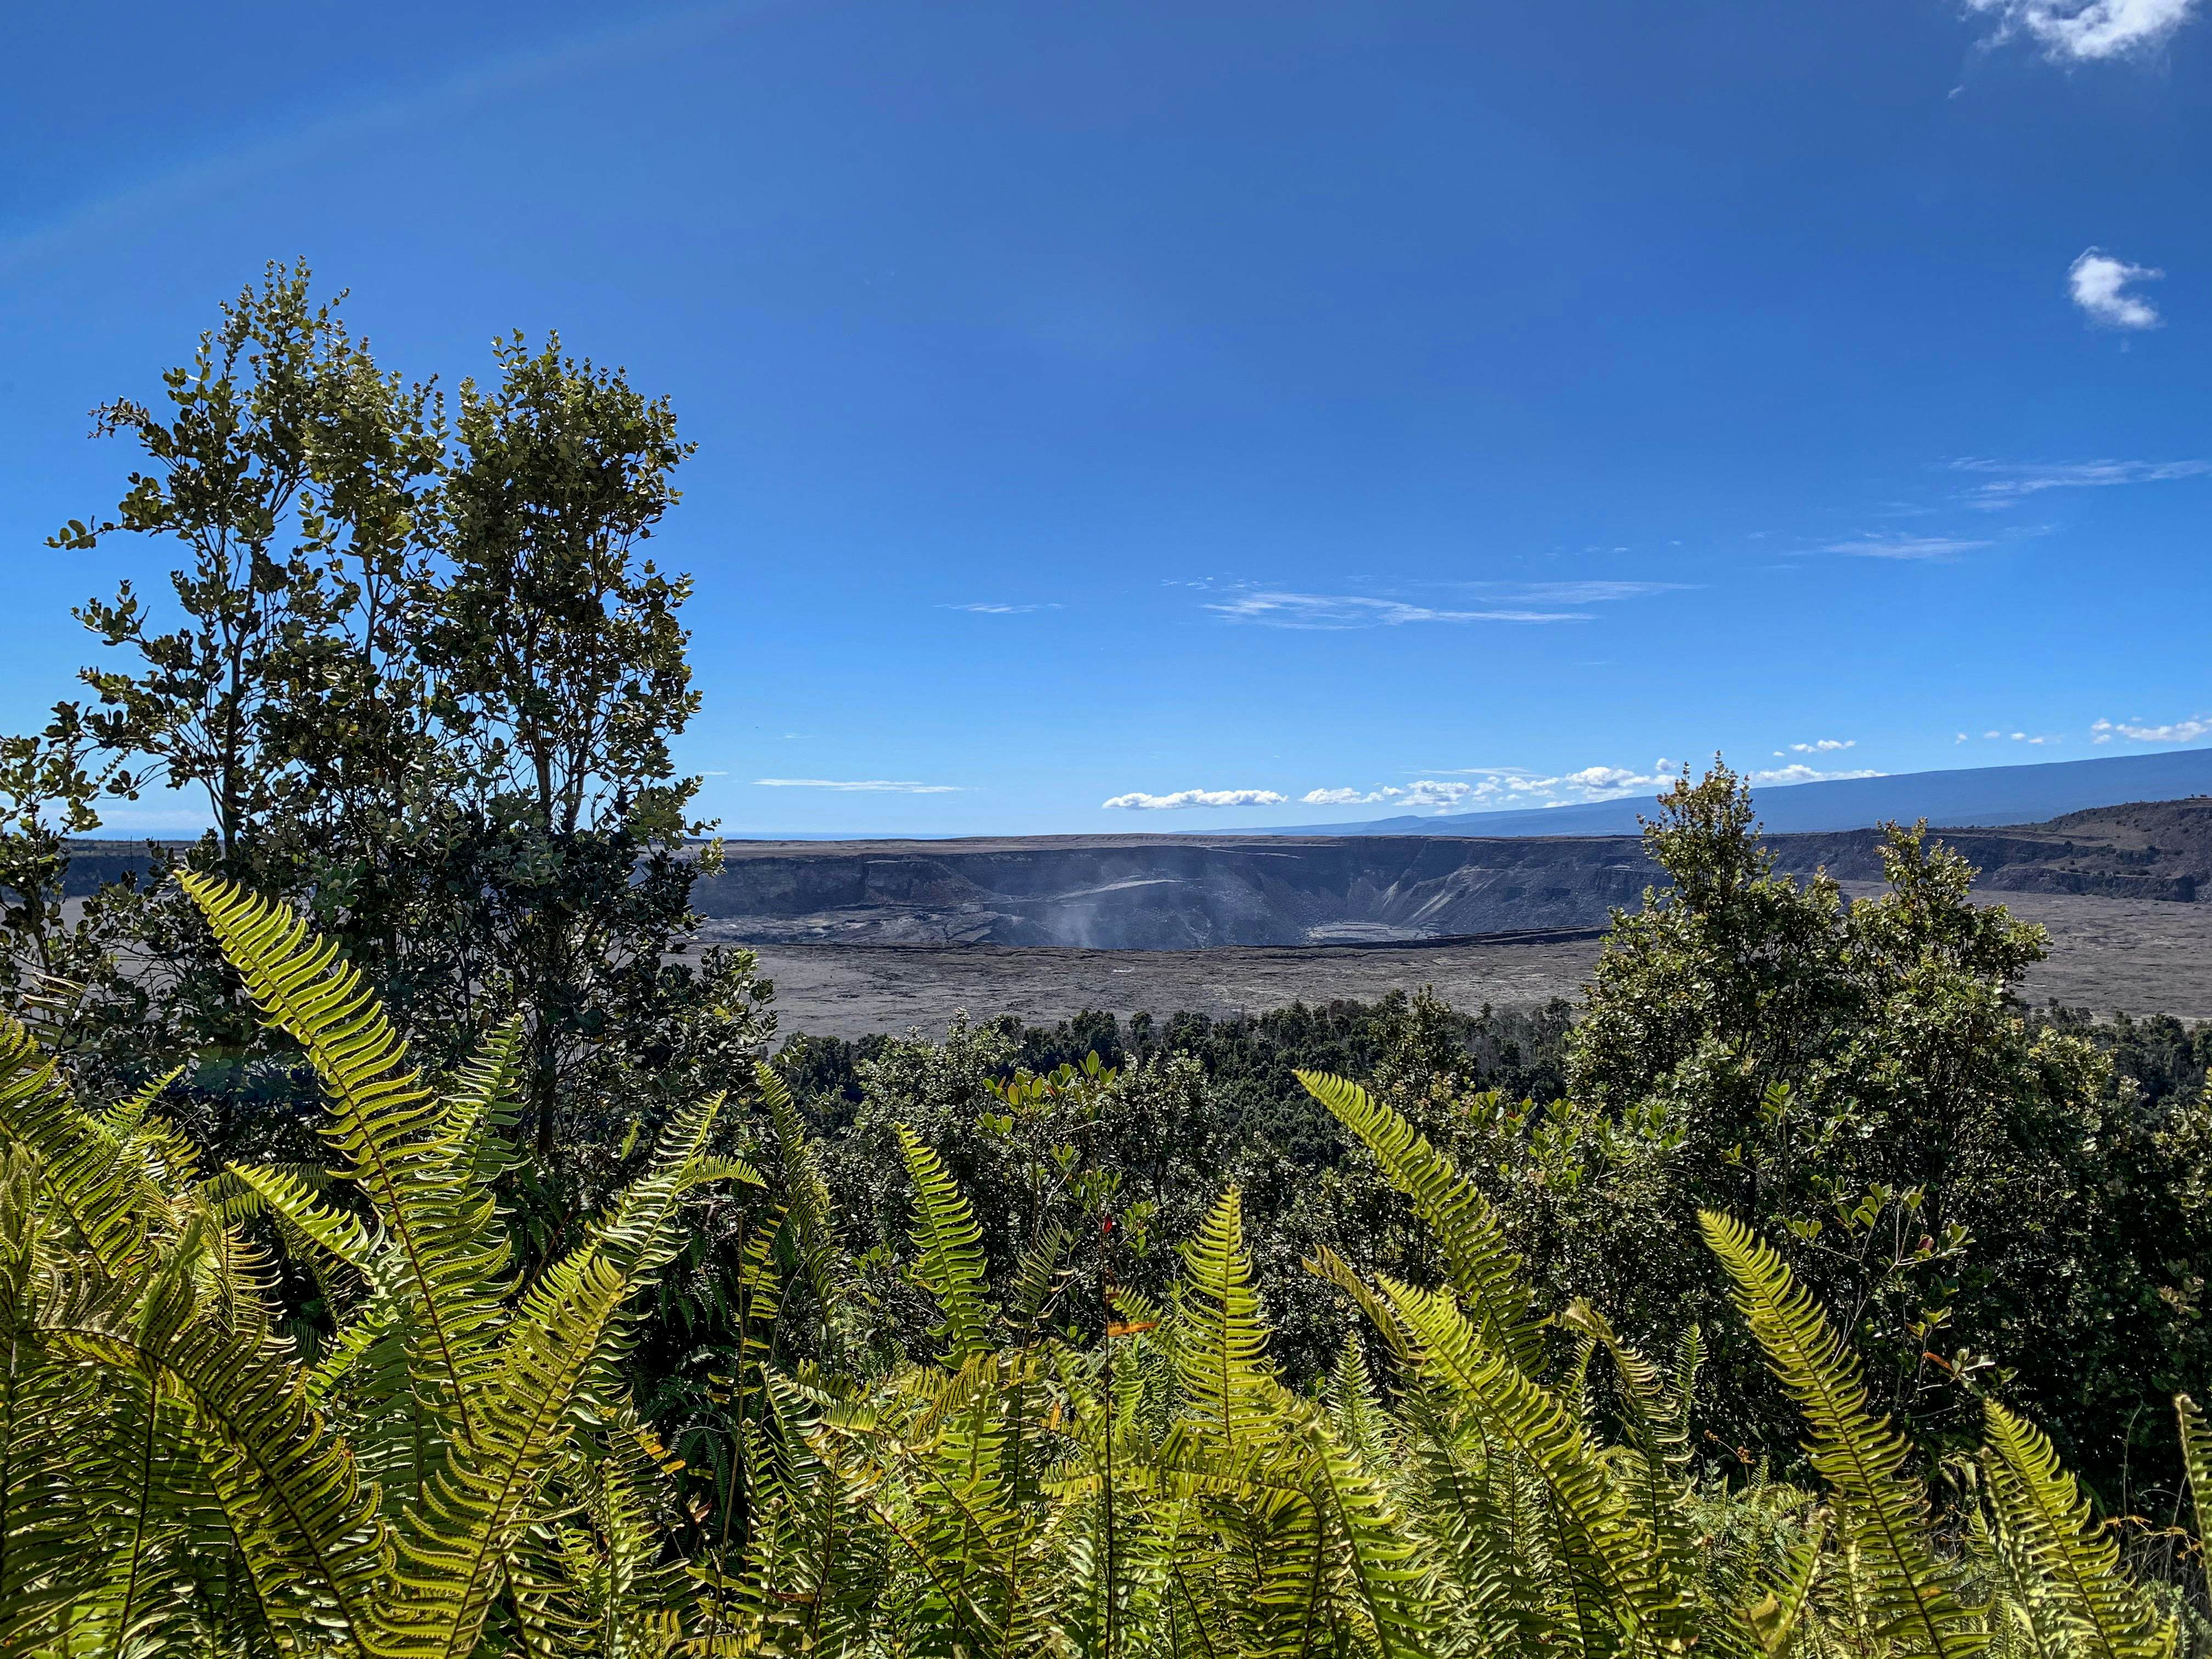 I Camped at Small National Park With Active Volcano, Worth Visiting